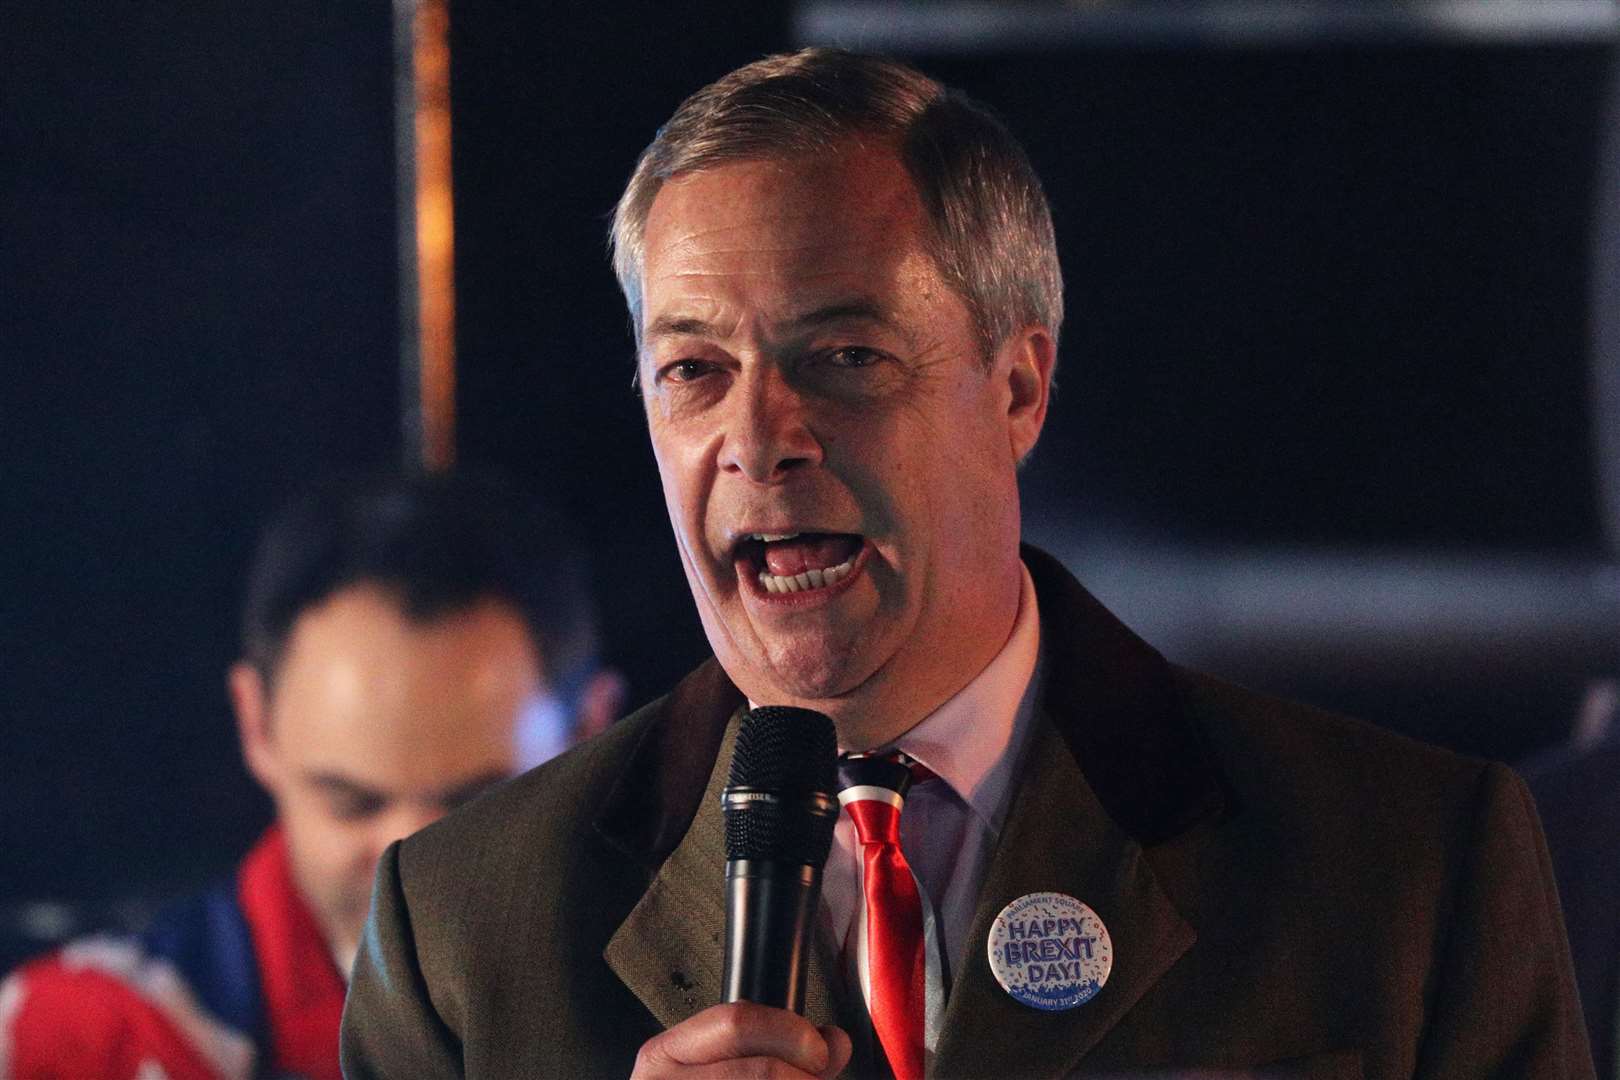 Speaking on his GB News show, Mr Farage accused Dame Alison of breaching the FCA’s conduct rules (Jonathan Brady/PA)